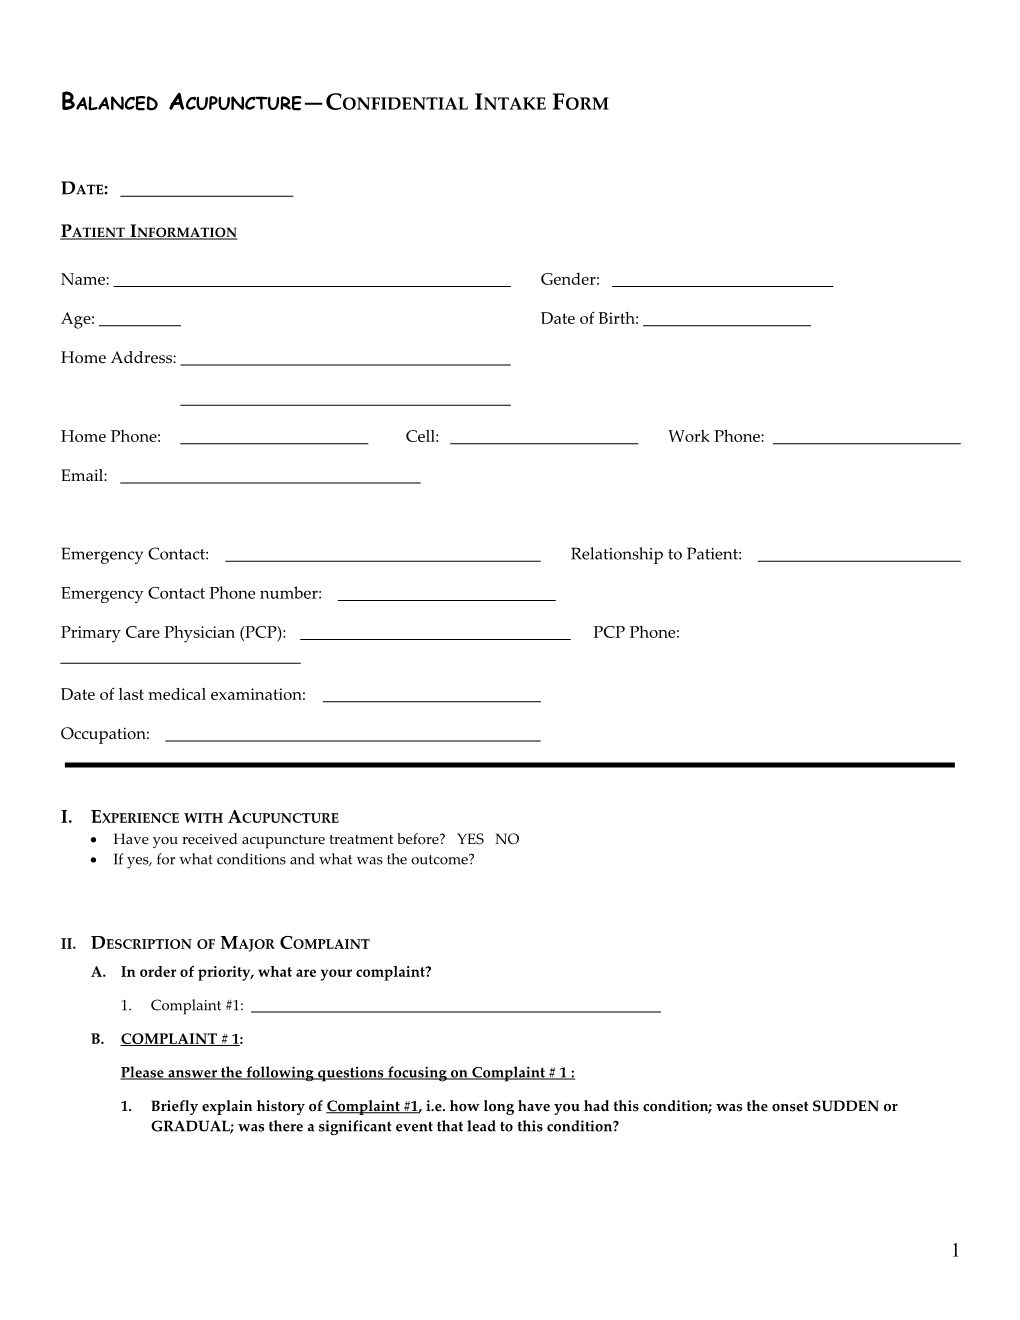 Balanced Acupuncture Confidential Intake Form